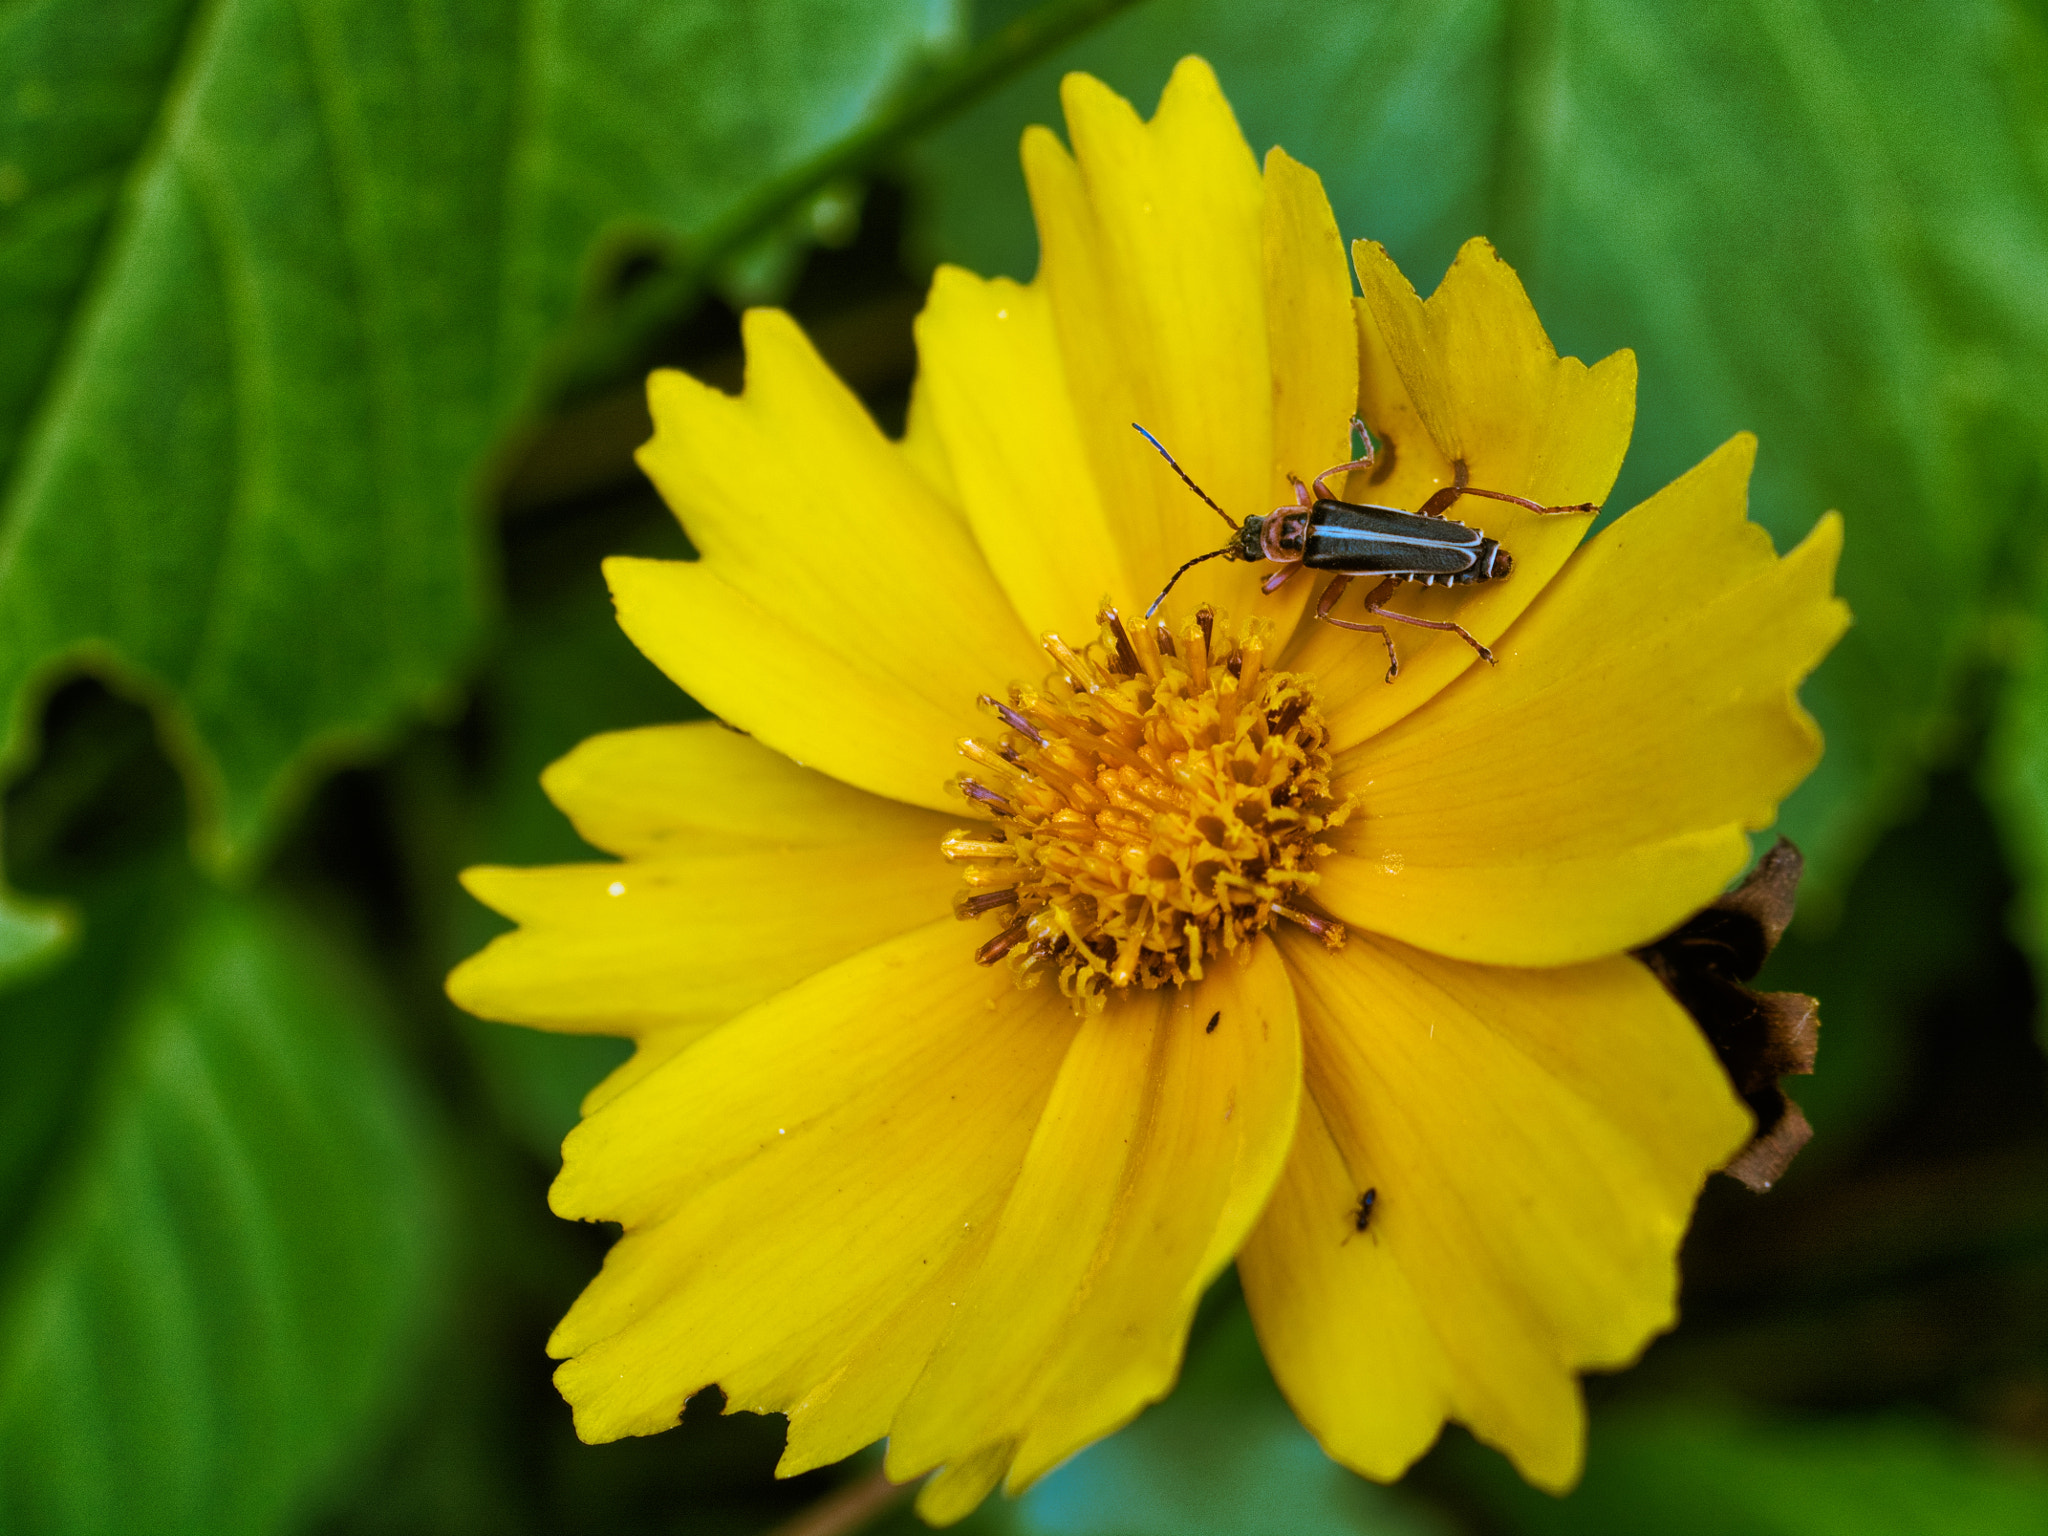 AF Zoom-Nikkor 35-135mm f/3.5-4.5 N sample photo. Yellow daisy insect photography